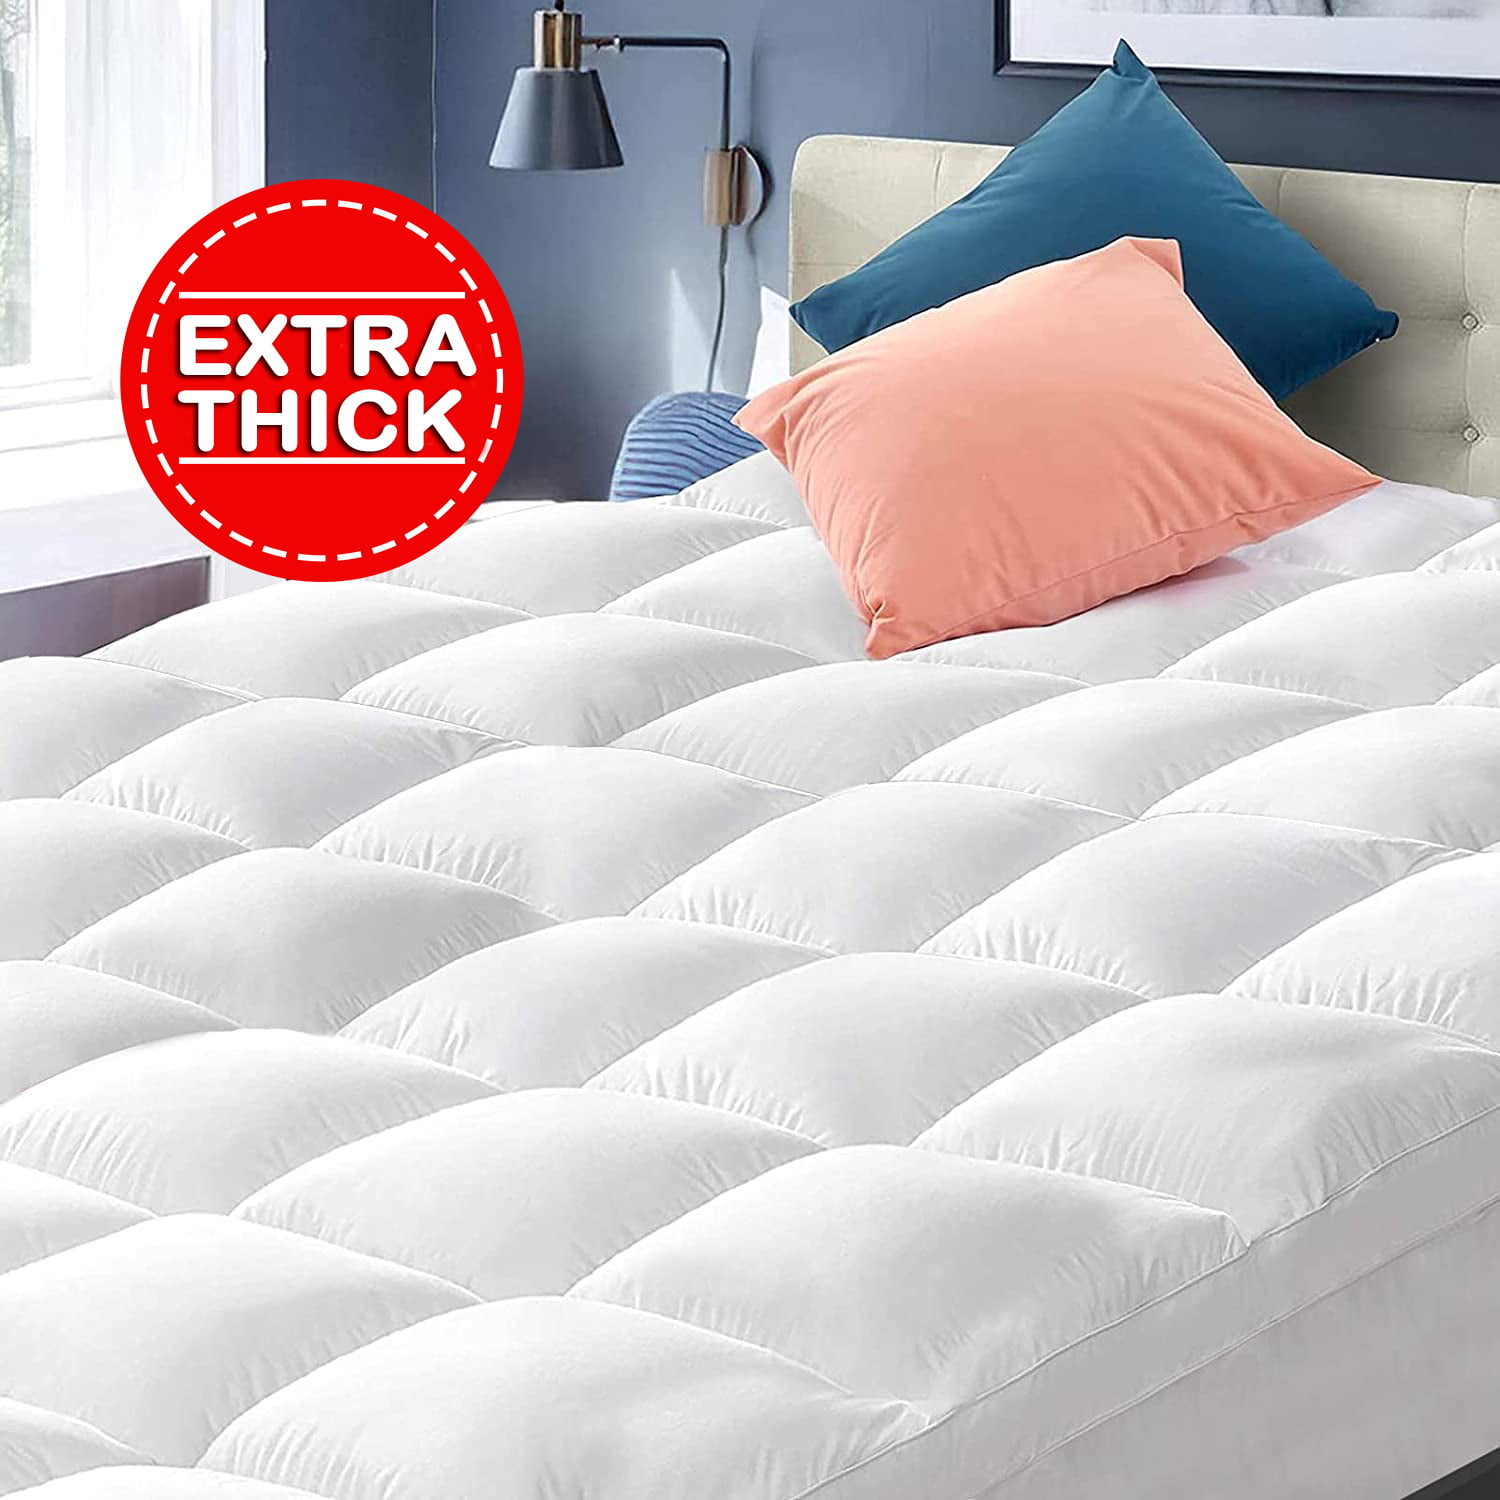 Extra Thick Mattress Topper Cooling Mattress Pad Cover 400TC Cotton Pillow Top 